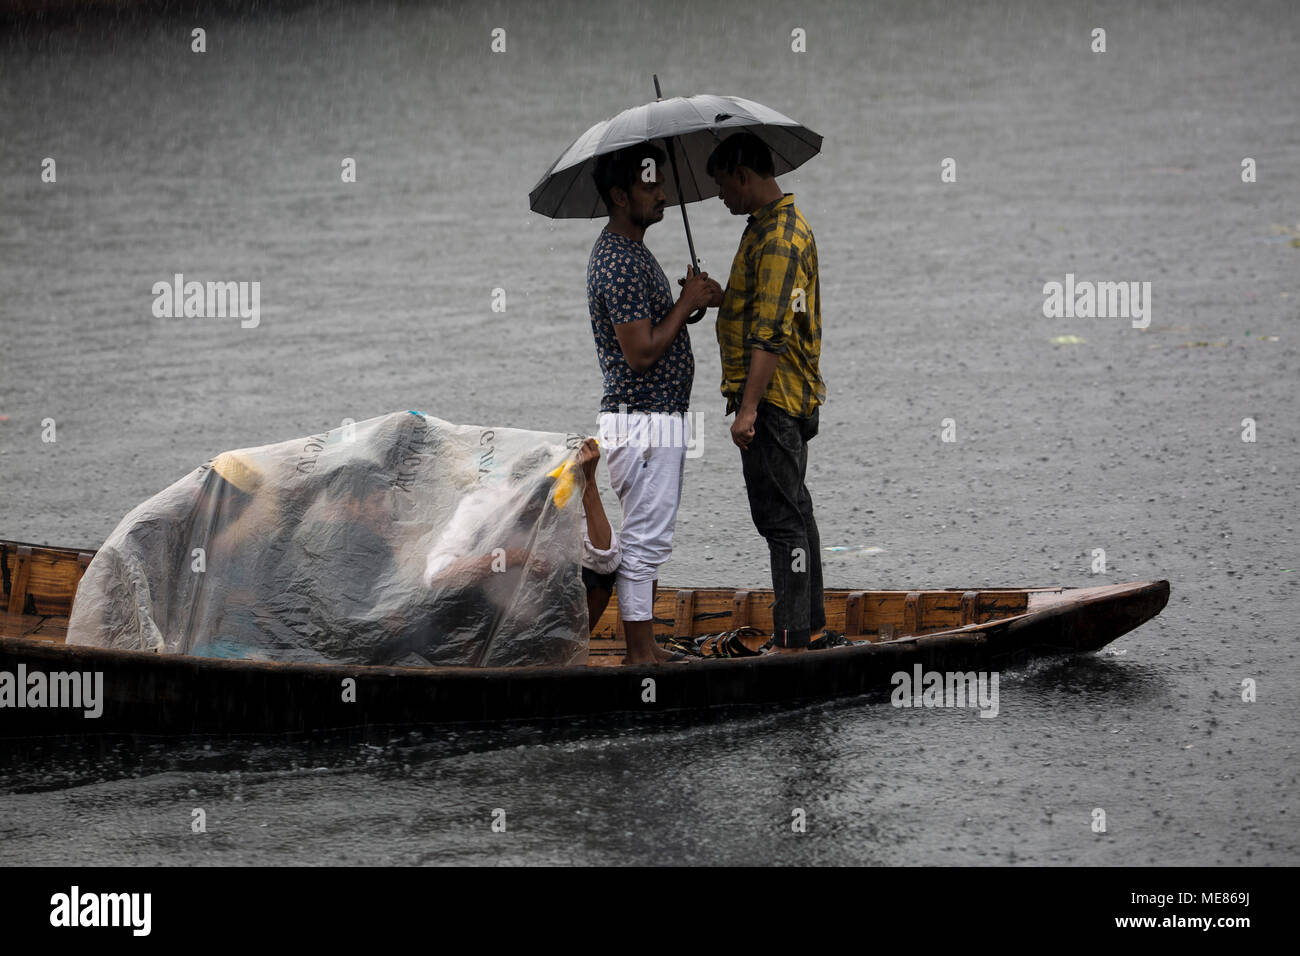 Dhaka, Bangladesh. 21st April, 2018.  Bangladeshi commuters use boats to cross the Buriganga River  during rain in Dhaka, Bangladesh on April 21, 2018.  The Buriganga River is economically very important to Dhaka, used to transport a multitude of goods, produce and people everyday. It is estimated that some fifty thousand people cross the Buriganga River from Keraniganj to Dhaka, for work everyday. Credit: zakir hossain chowdhury zakir/Alamy Live News Stock Photo